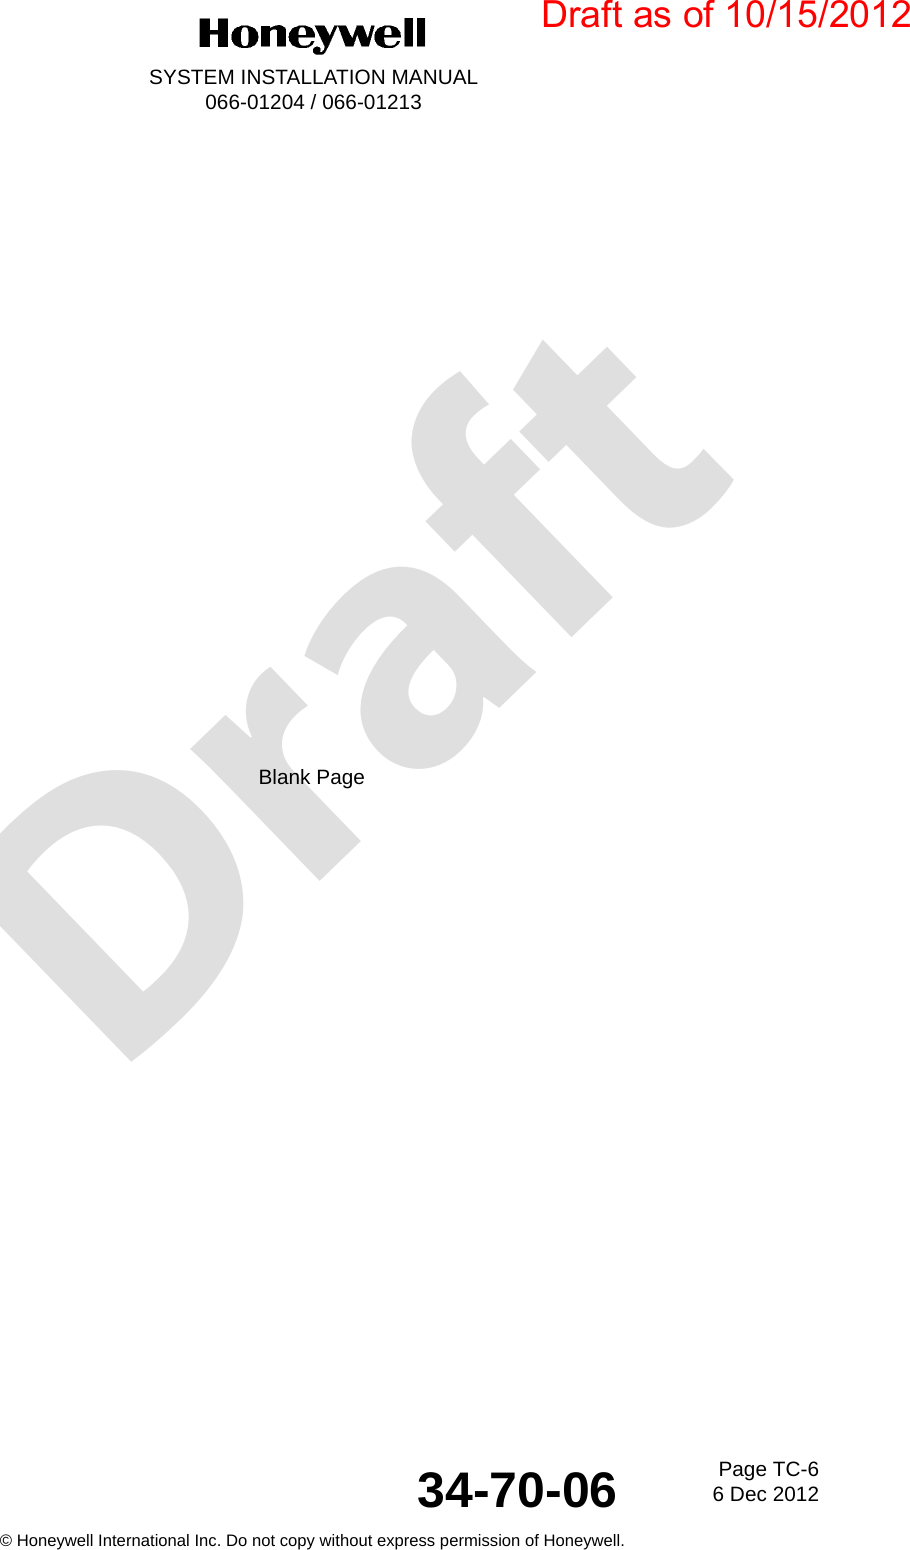 DraftPage TC-66 Dec 201234-70-06SYSTEM INSTALLATION MANUAL066-01204 / 066-01213© Honeywell International Inc. Do not copy without express permission of Honeywell.Blank PageDraft as of 10/15/2012